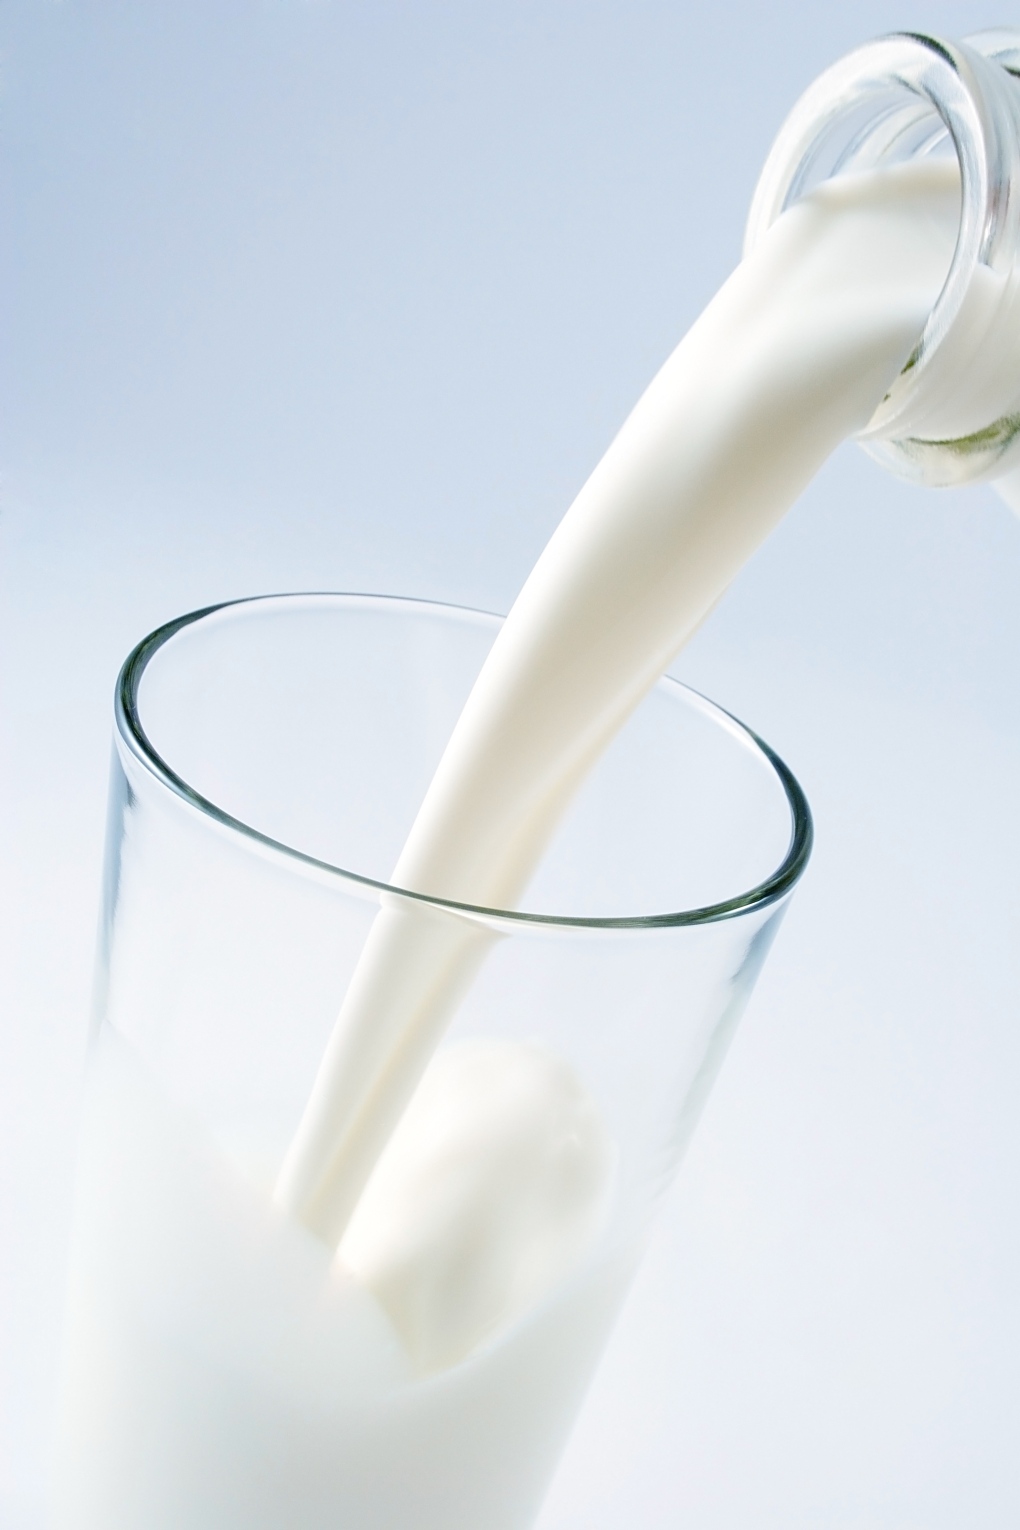 Go easy on the calcium, researchers advise